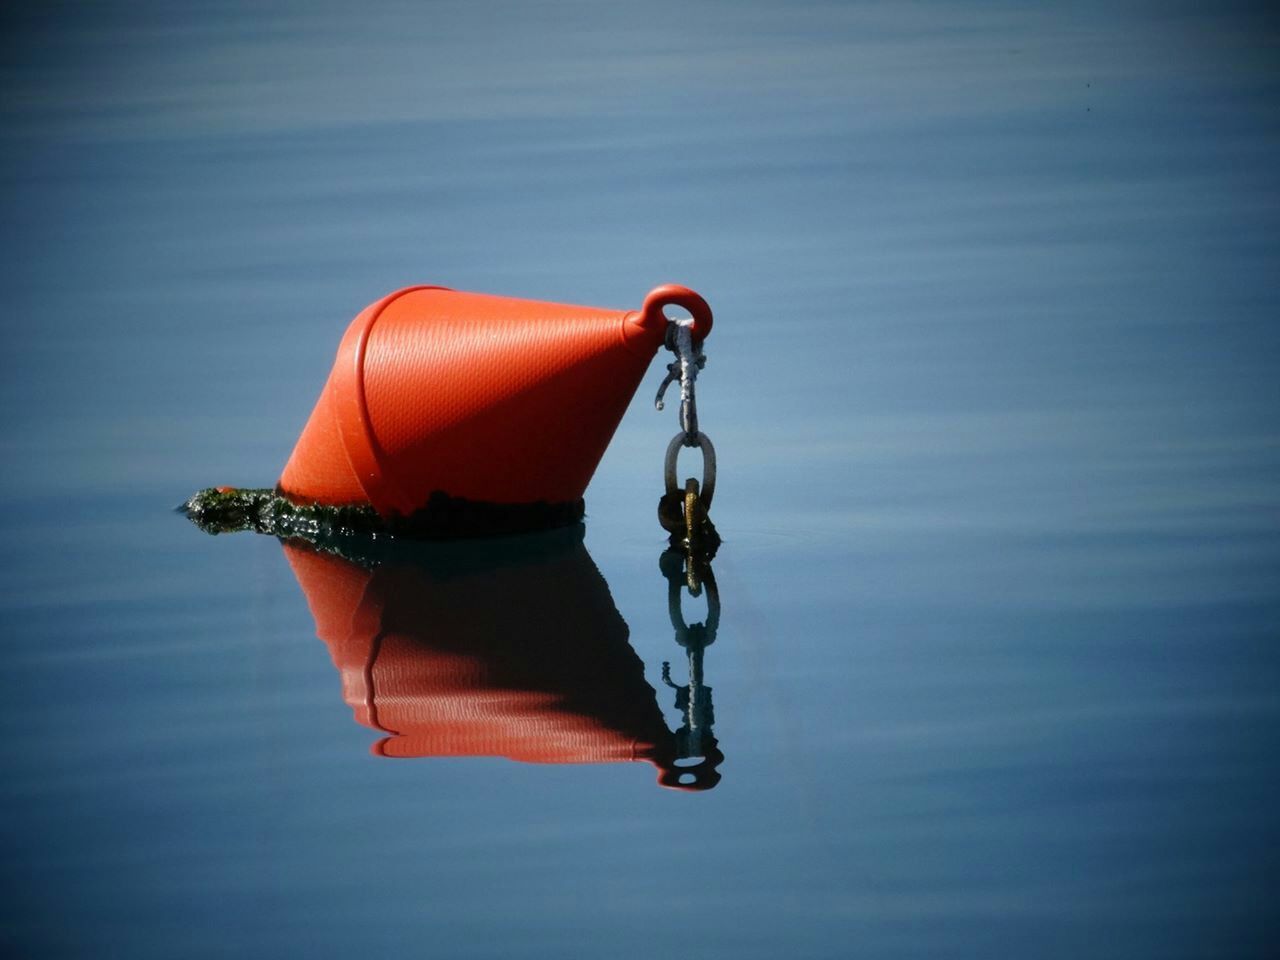 hanging, red, water, close-up, still life, single object, no people, reflection, rope, waterfront, buoy, outdoors, focus on foreground, day, sky, nature, two objects, decoration, sunlight, sea